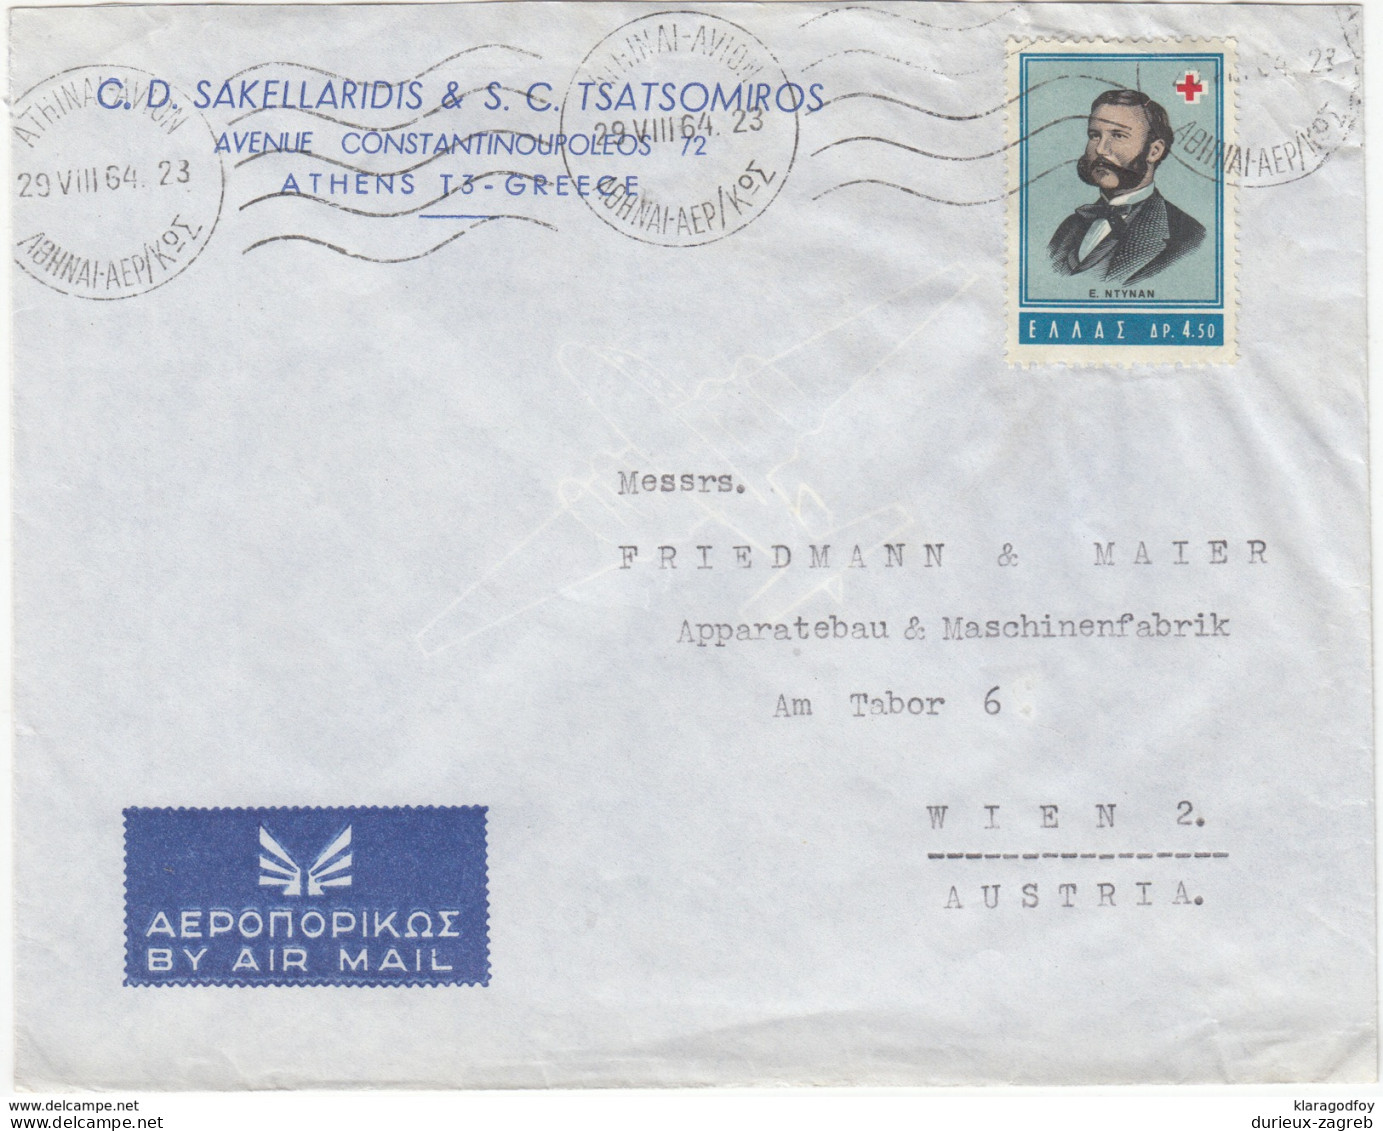 C.D. Sakellaridis & S.C. Tsatsomiros Company Air Mail Letter Cover Travelled 1964 To Austria B171005 - Lettres & Documents